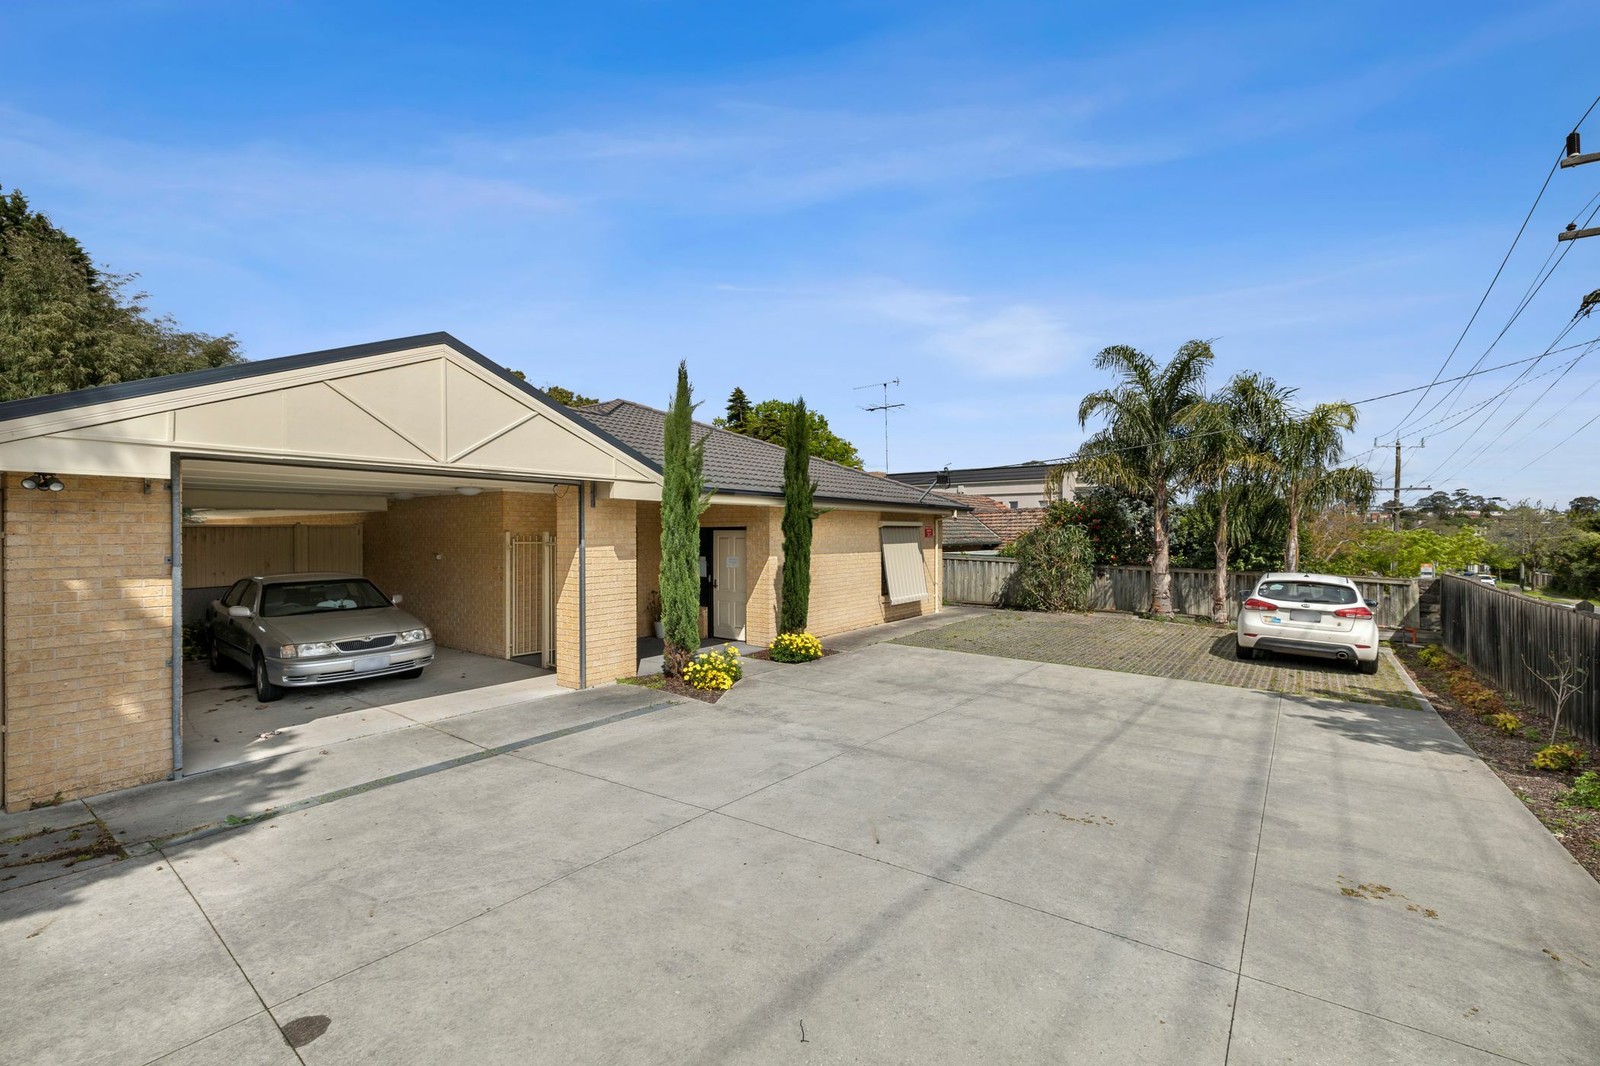 SDA property in Balwyn with several car spaces